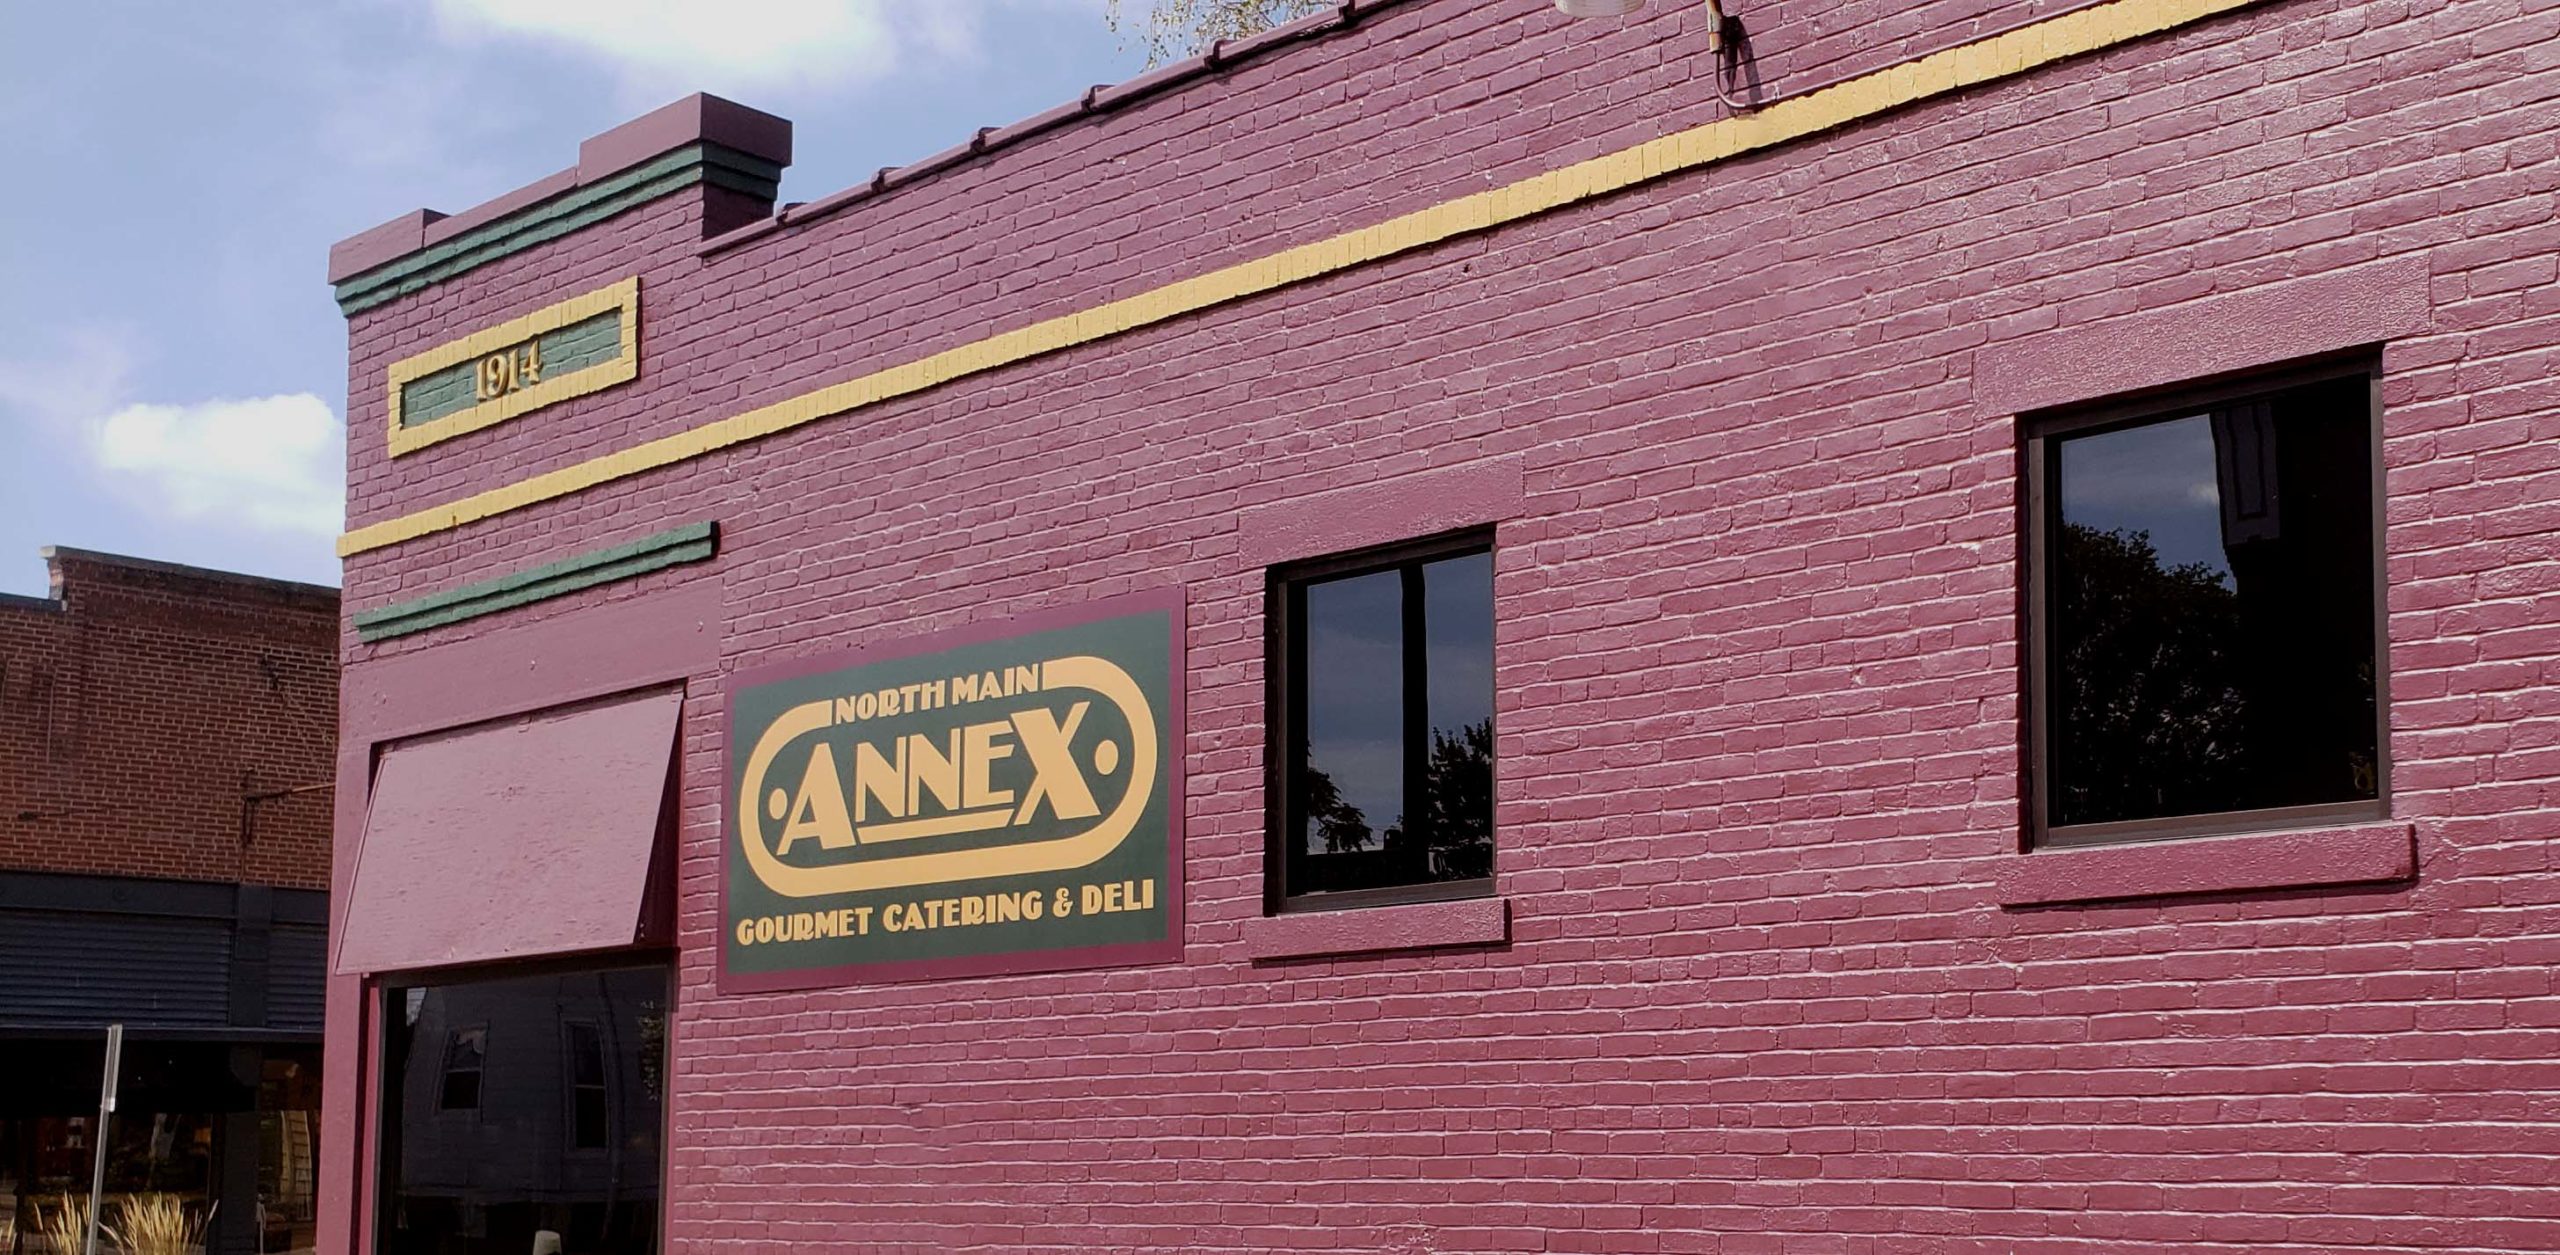 the side of north main annex gourmet catering and deli